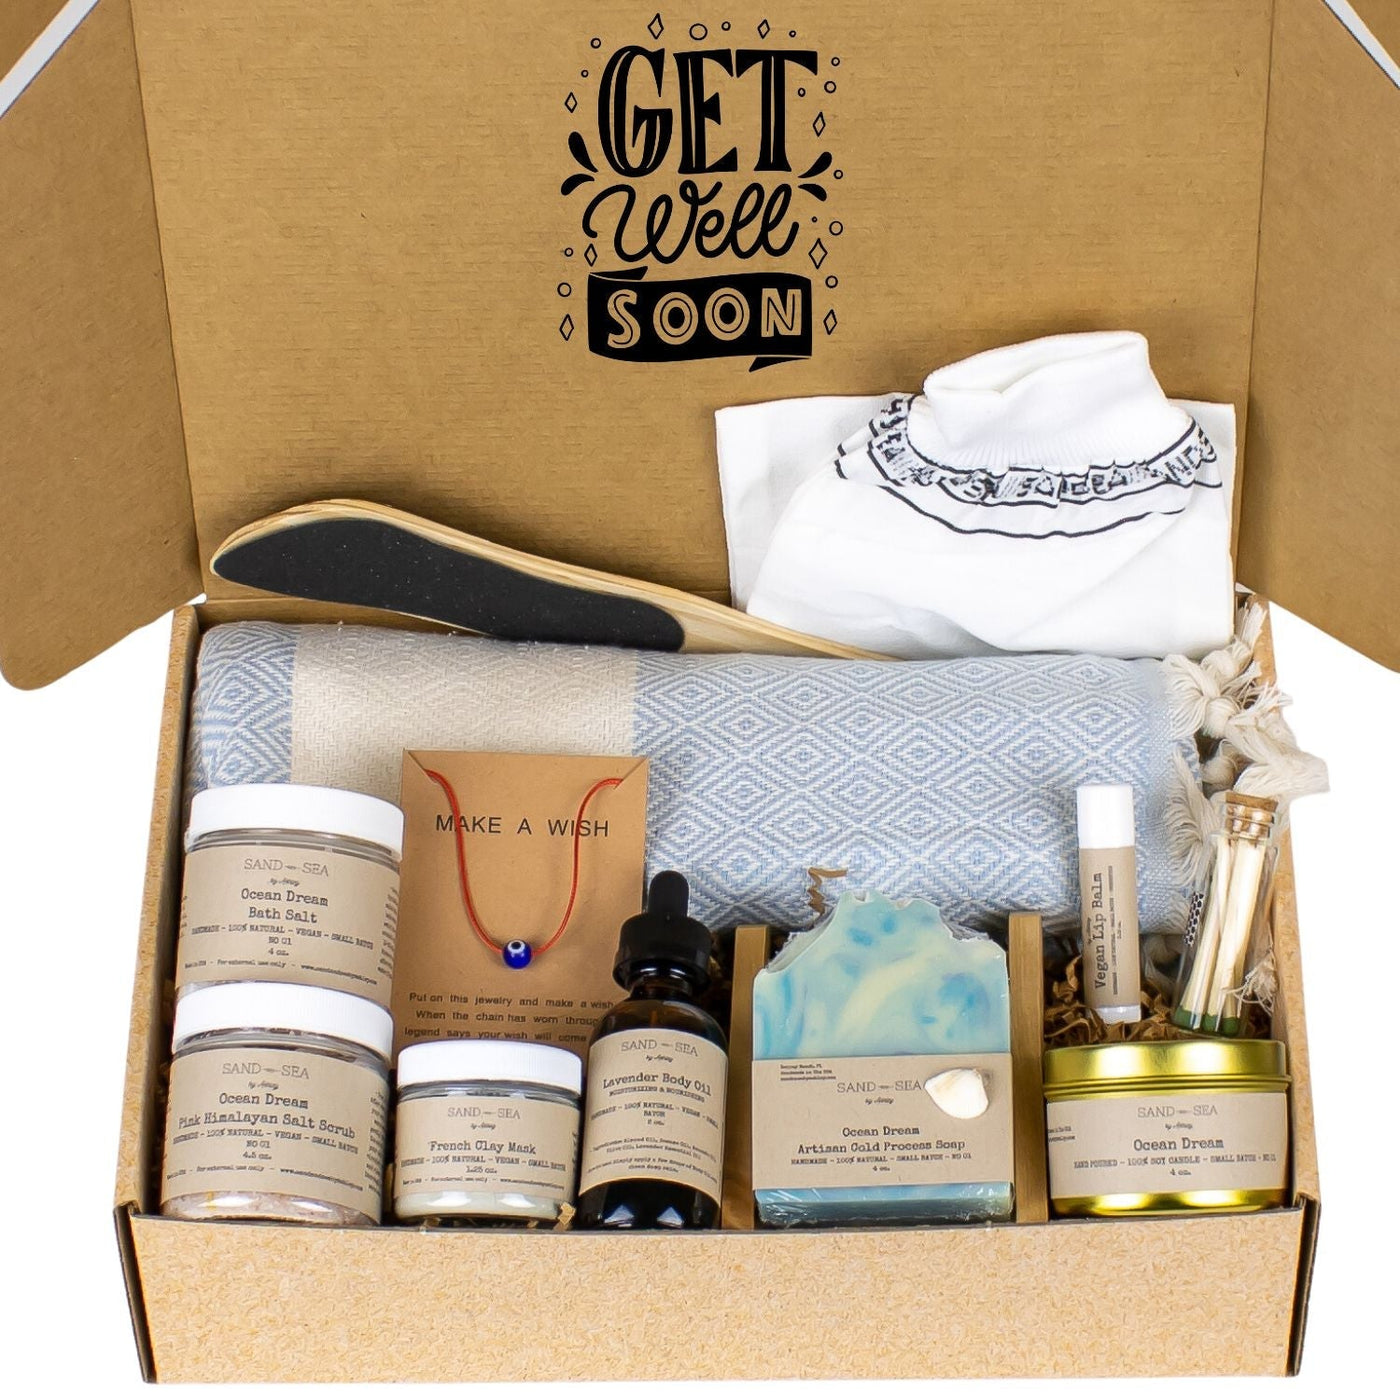 Get Well Soon Ocean Dream Spa Gift Baskets- Self Care Gift Box with Turkish Peshtemal 13 pieces - Sand & Sea by Ashley